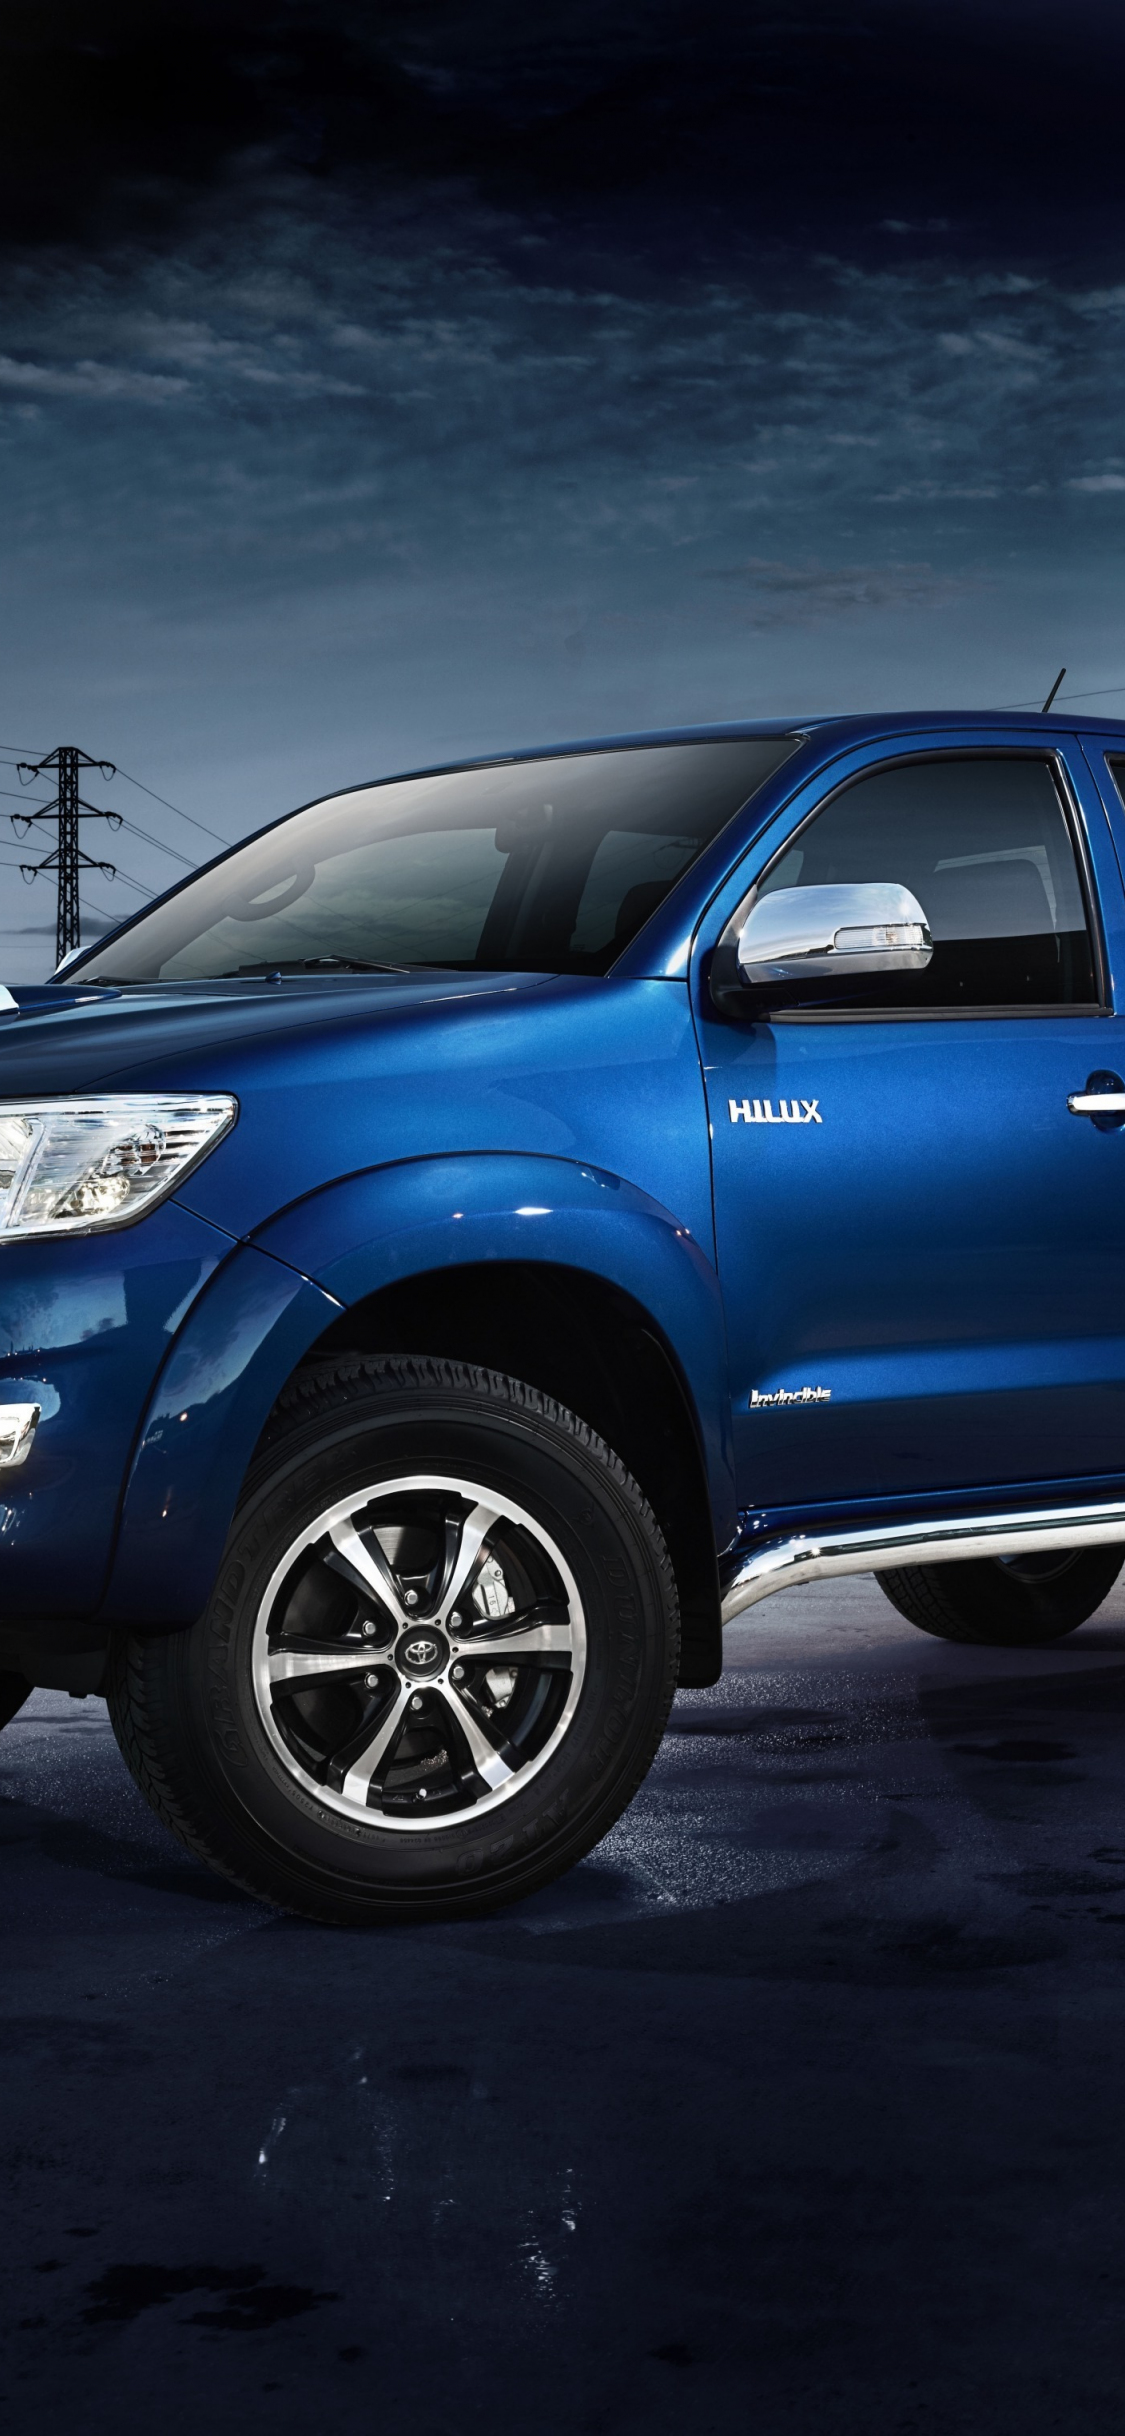 Download wallpaper 1125x2436 toyota hilux, truck, iphone x, 1125x2436 hd  background, 1200